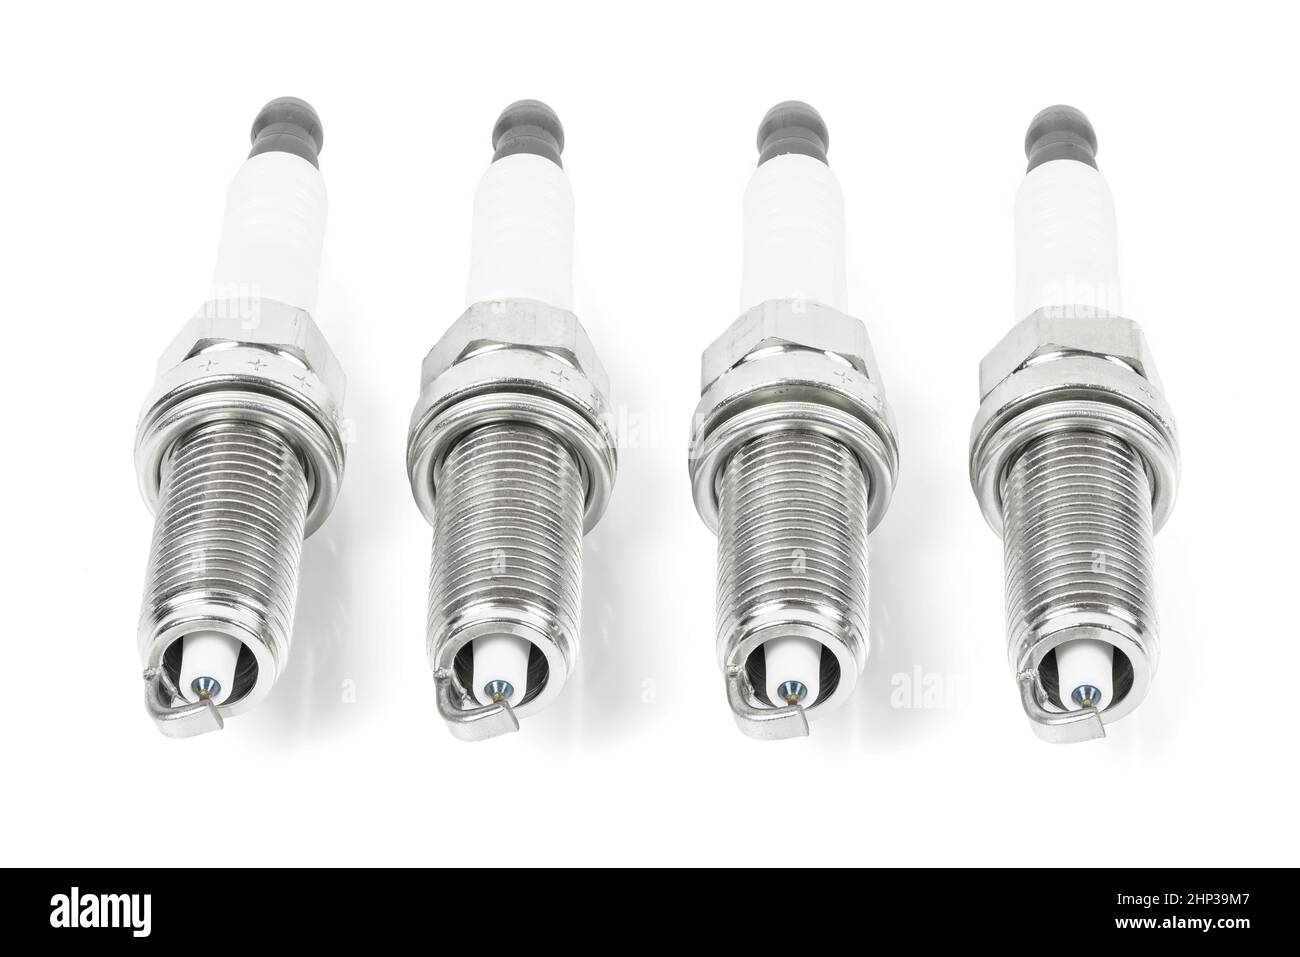 Four iridium spark plugs in a row isolated on white background with clipping path Stock Photo